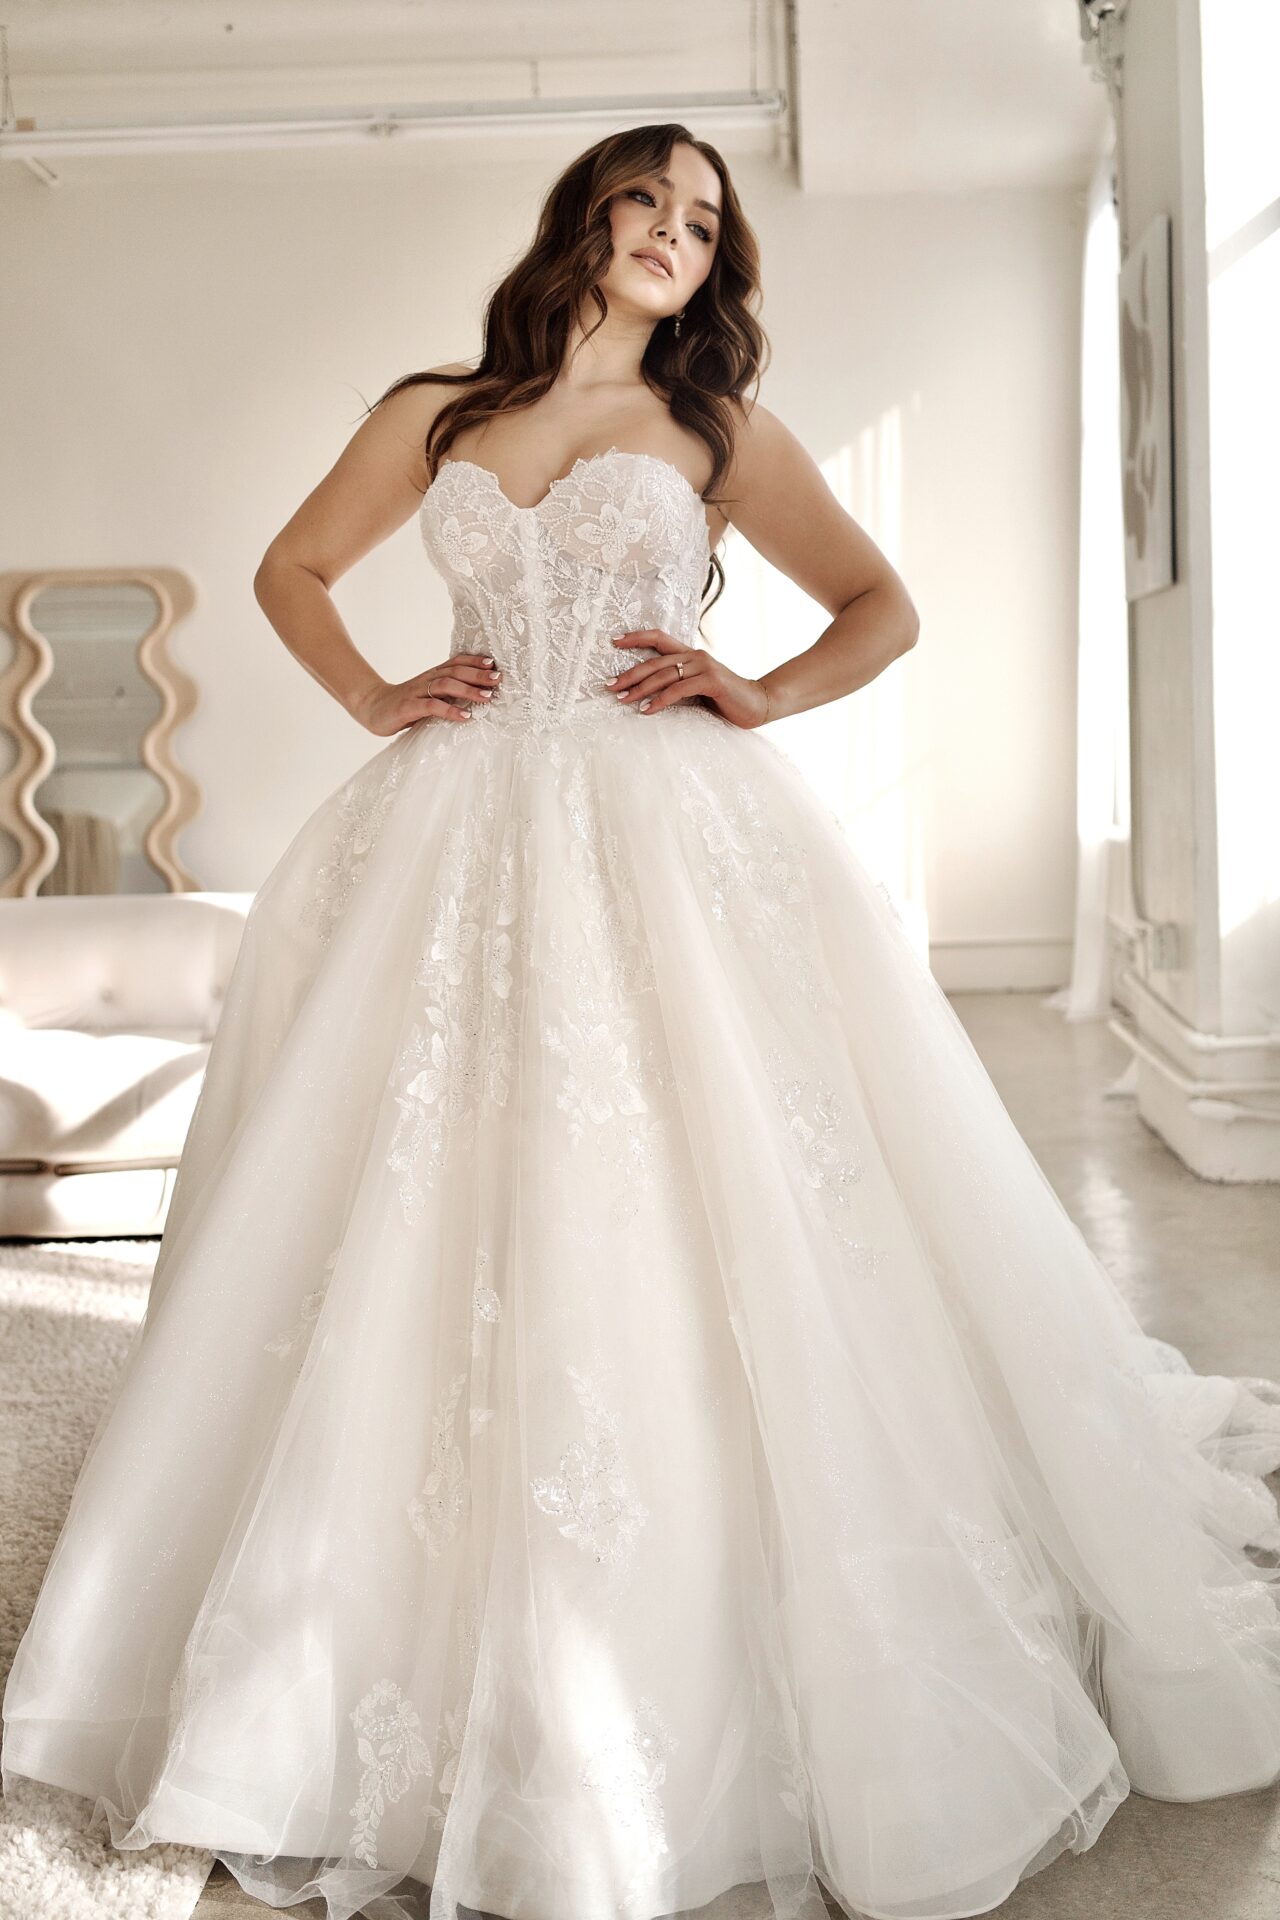 Strapless Lace Corset Ball Gown Wedding Dress